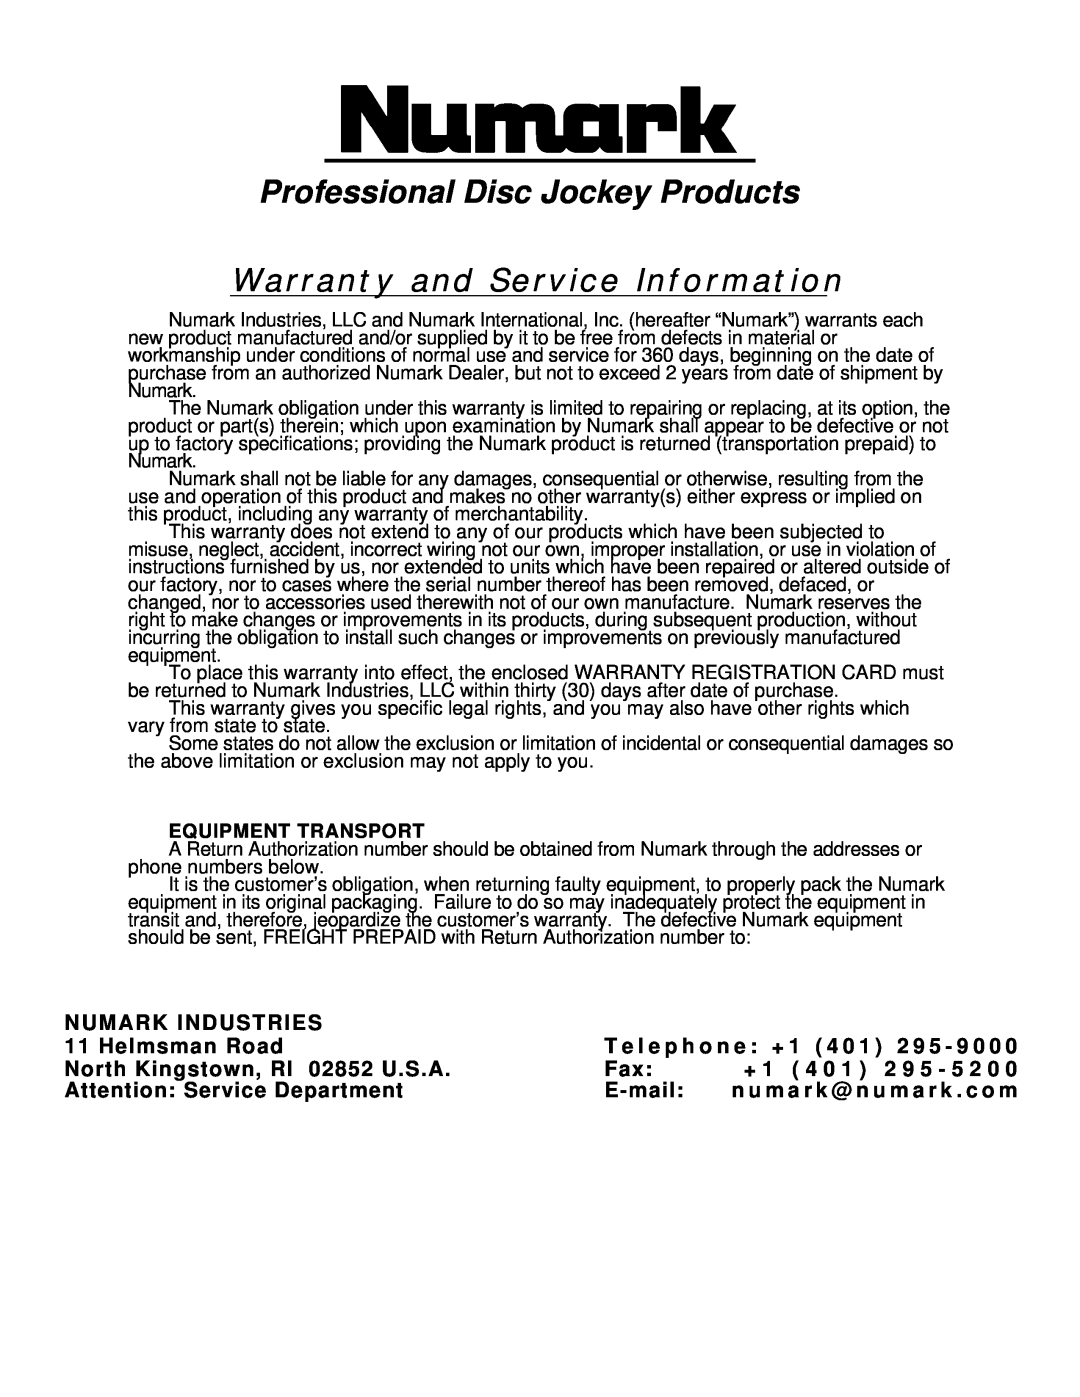 Numark Industries TT1910 owner manual Warranty and Service Information, Professional Disc Jockey Products 